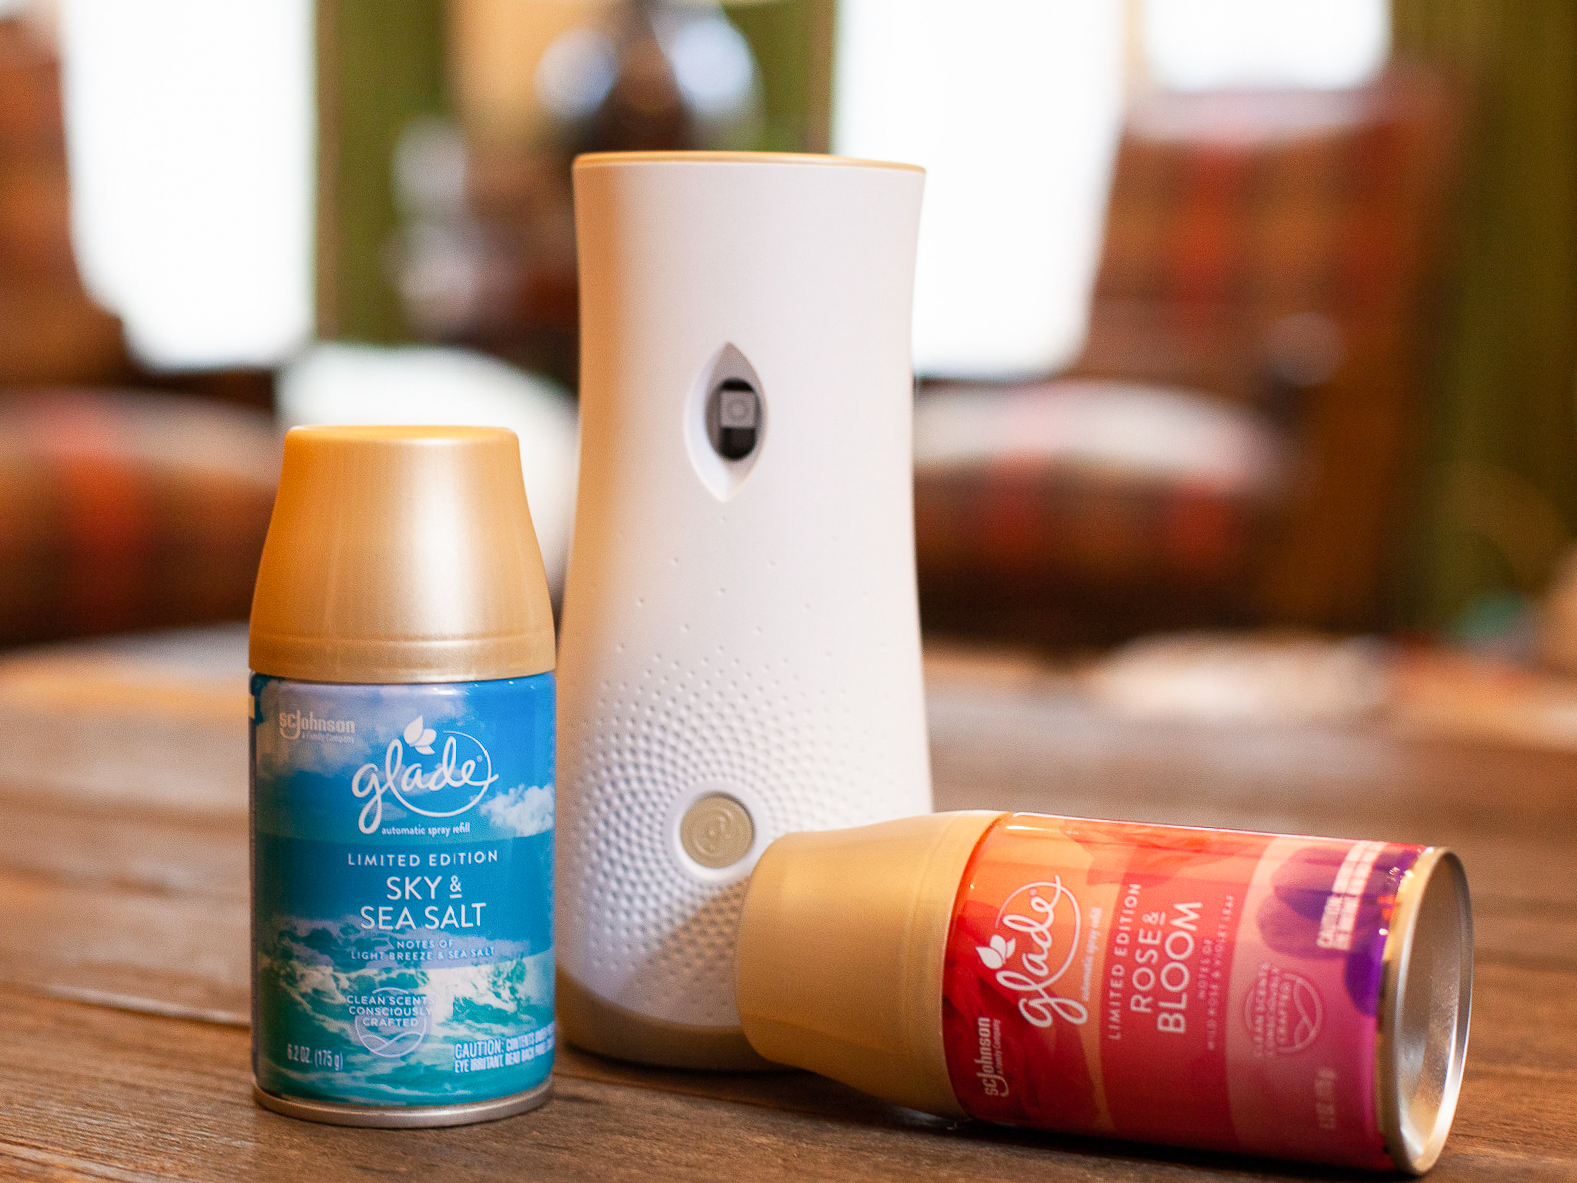 Try The New Glade® Limited Edition Spring Collection And Surround